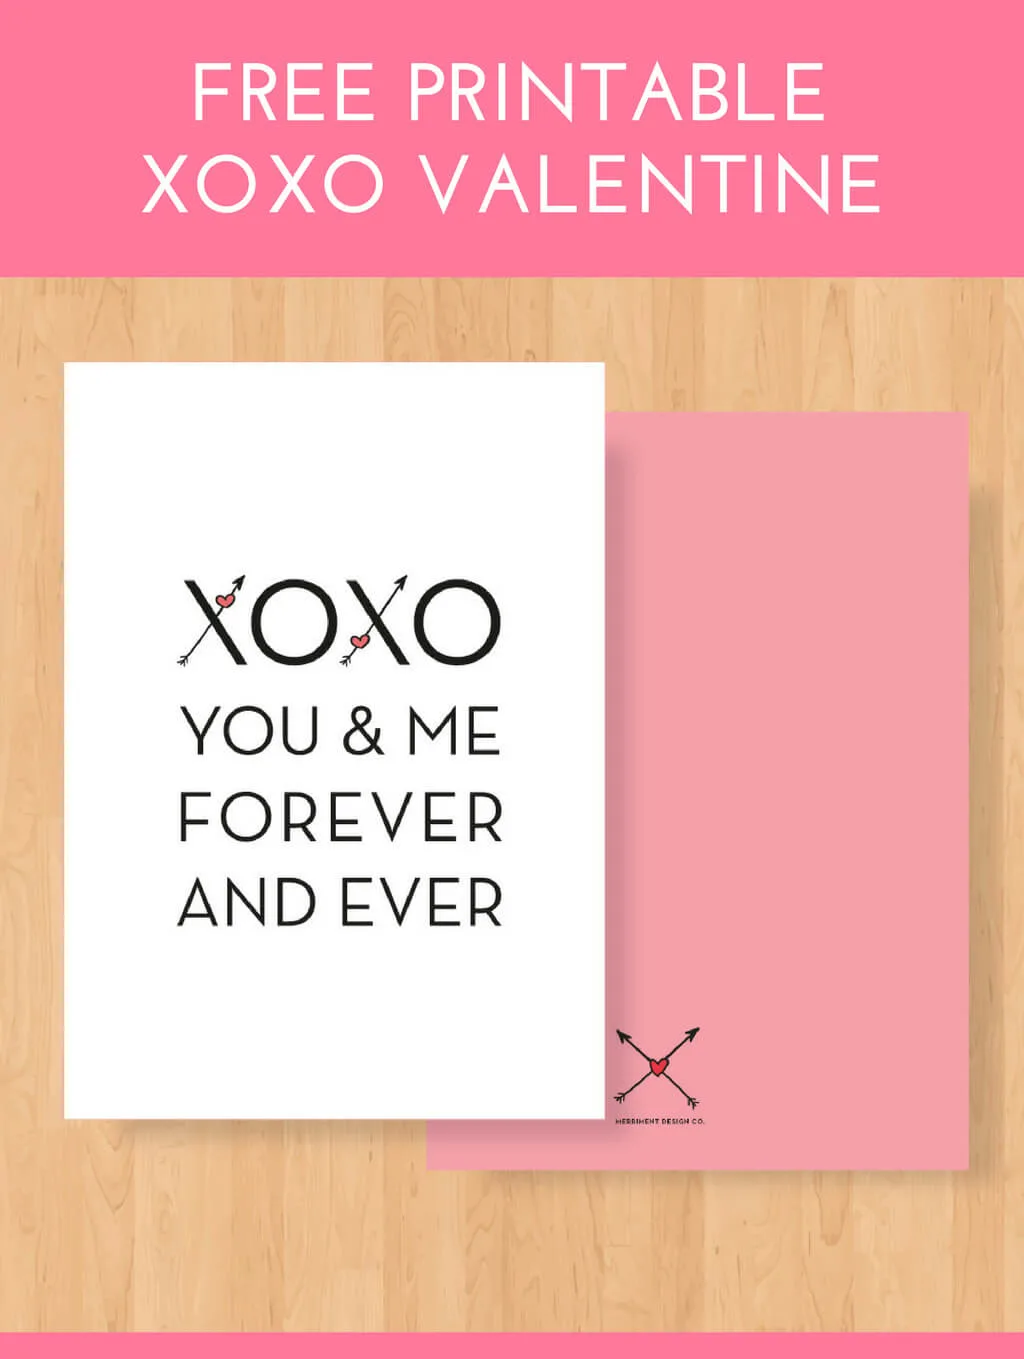 Free printable Valentine with arrows and hearts